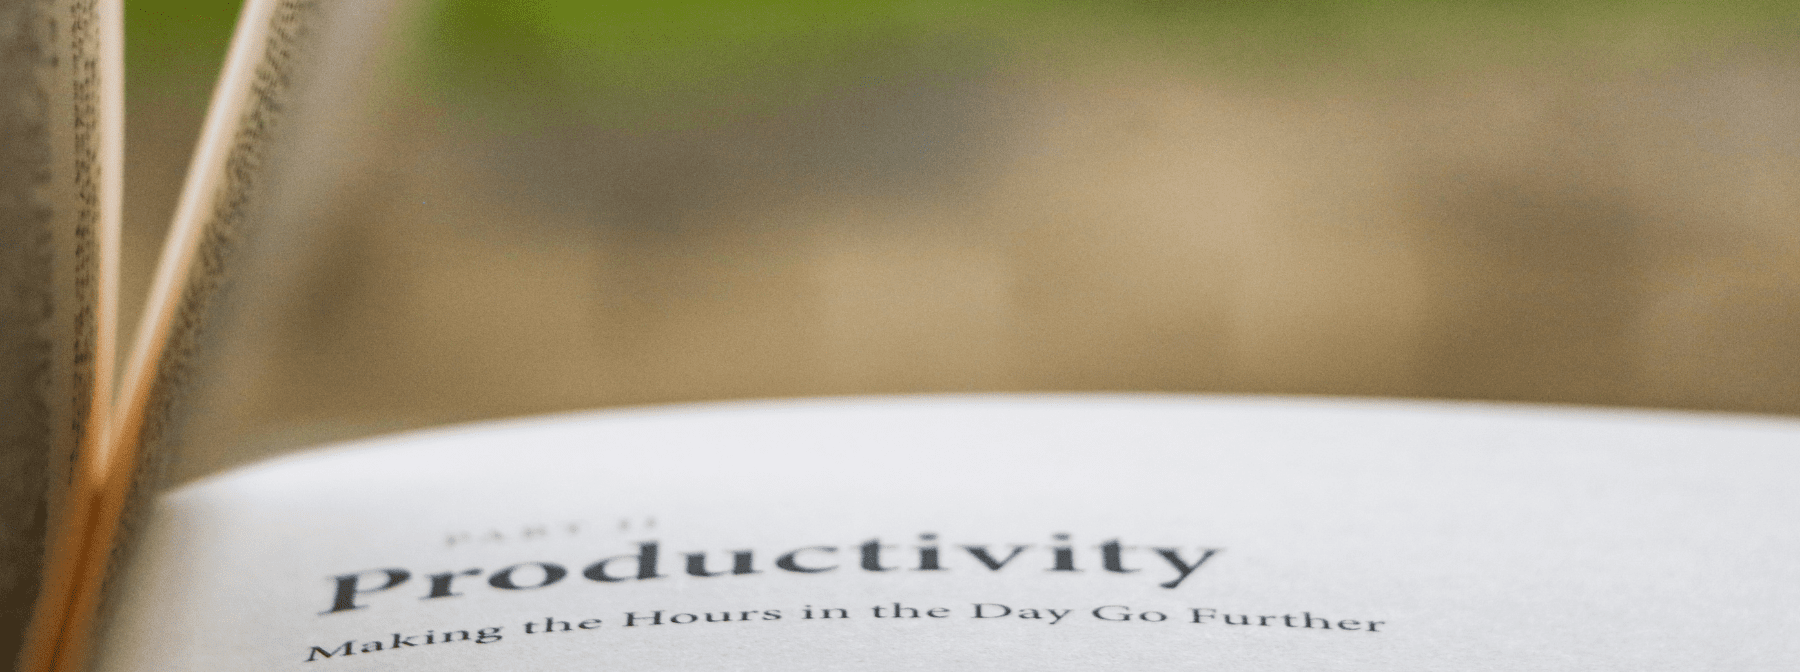 Tips for Productivity | Start the New Year Off With a Bang